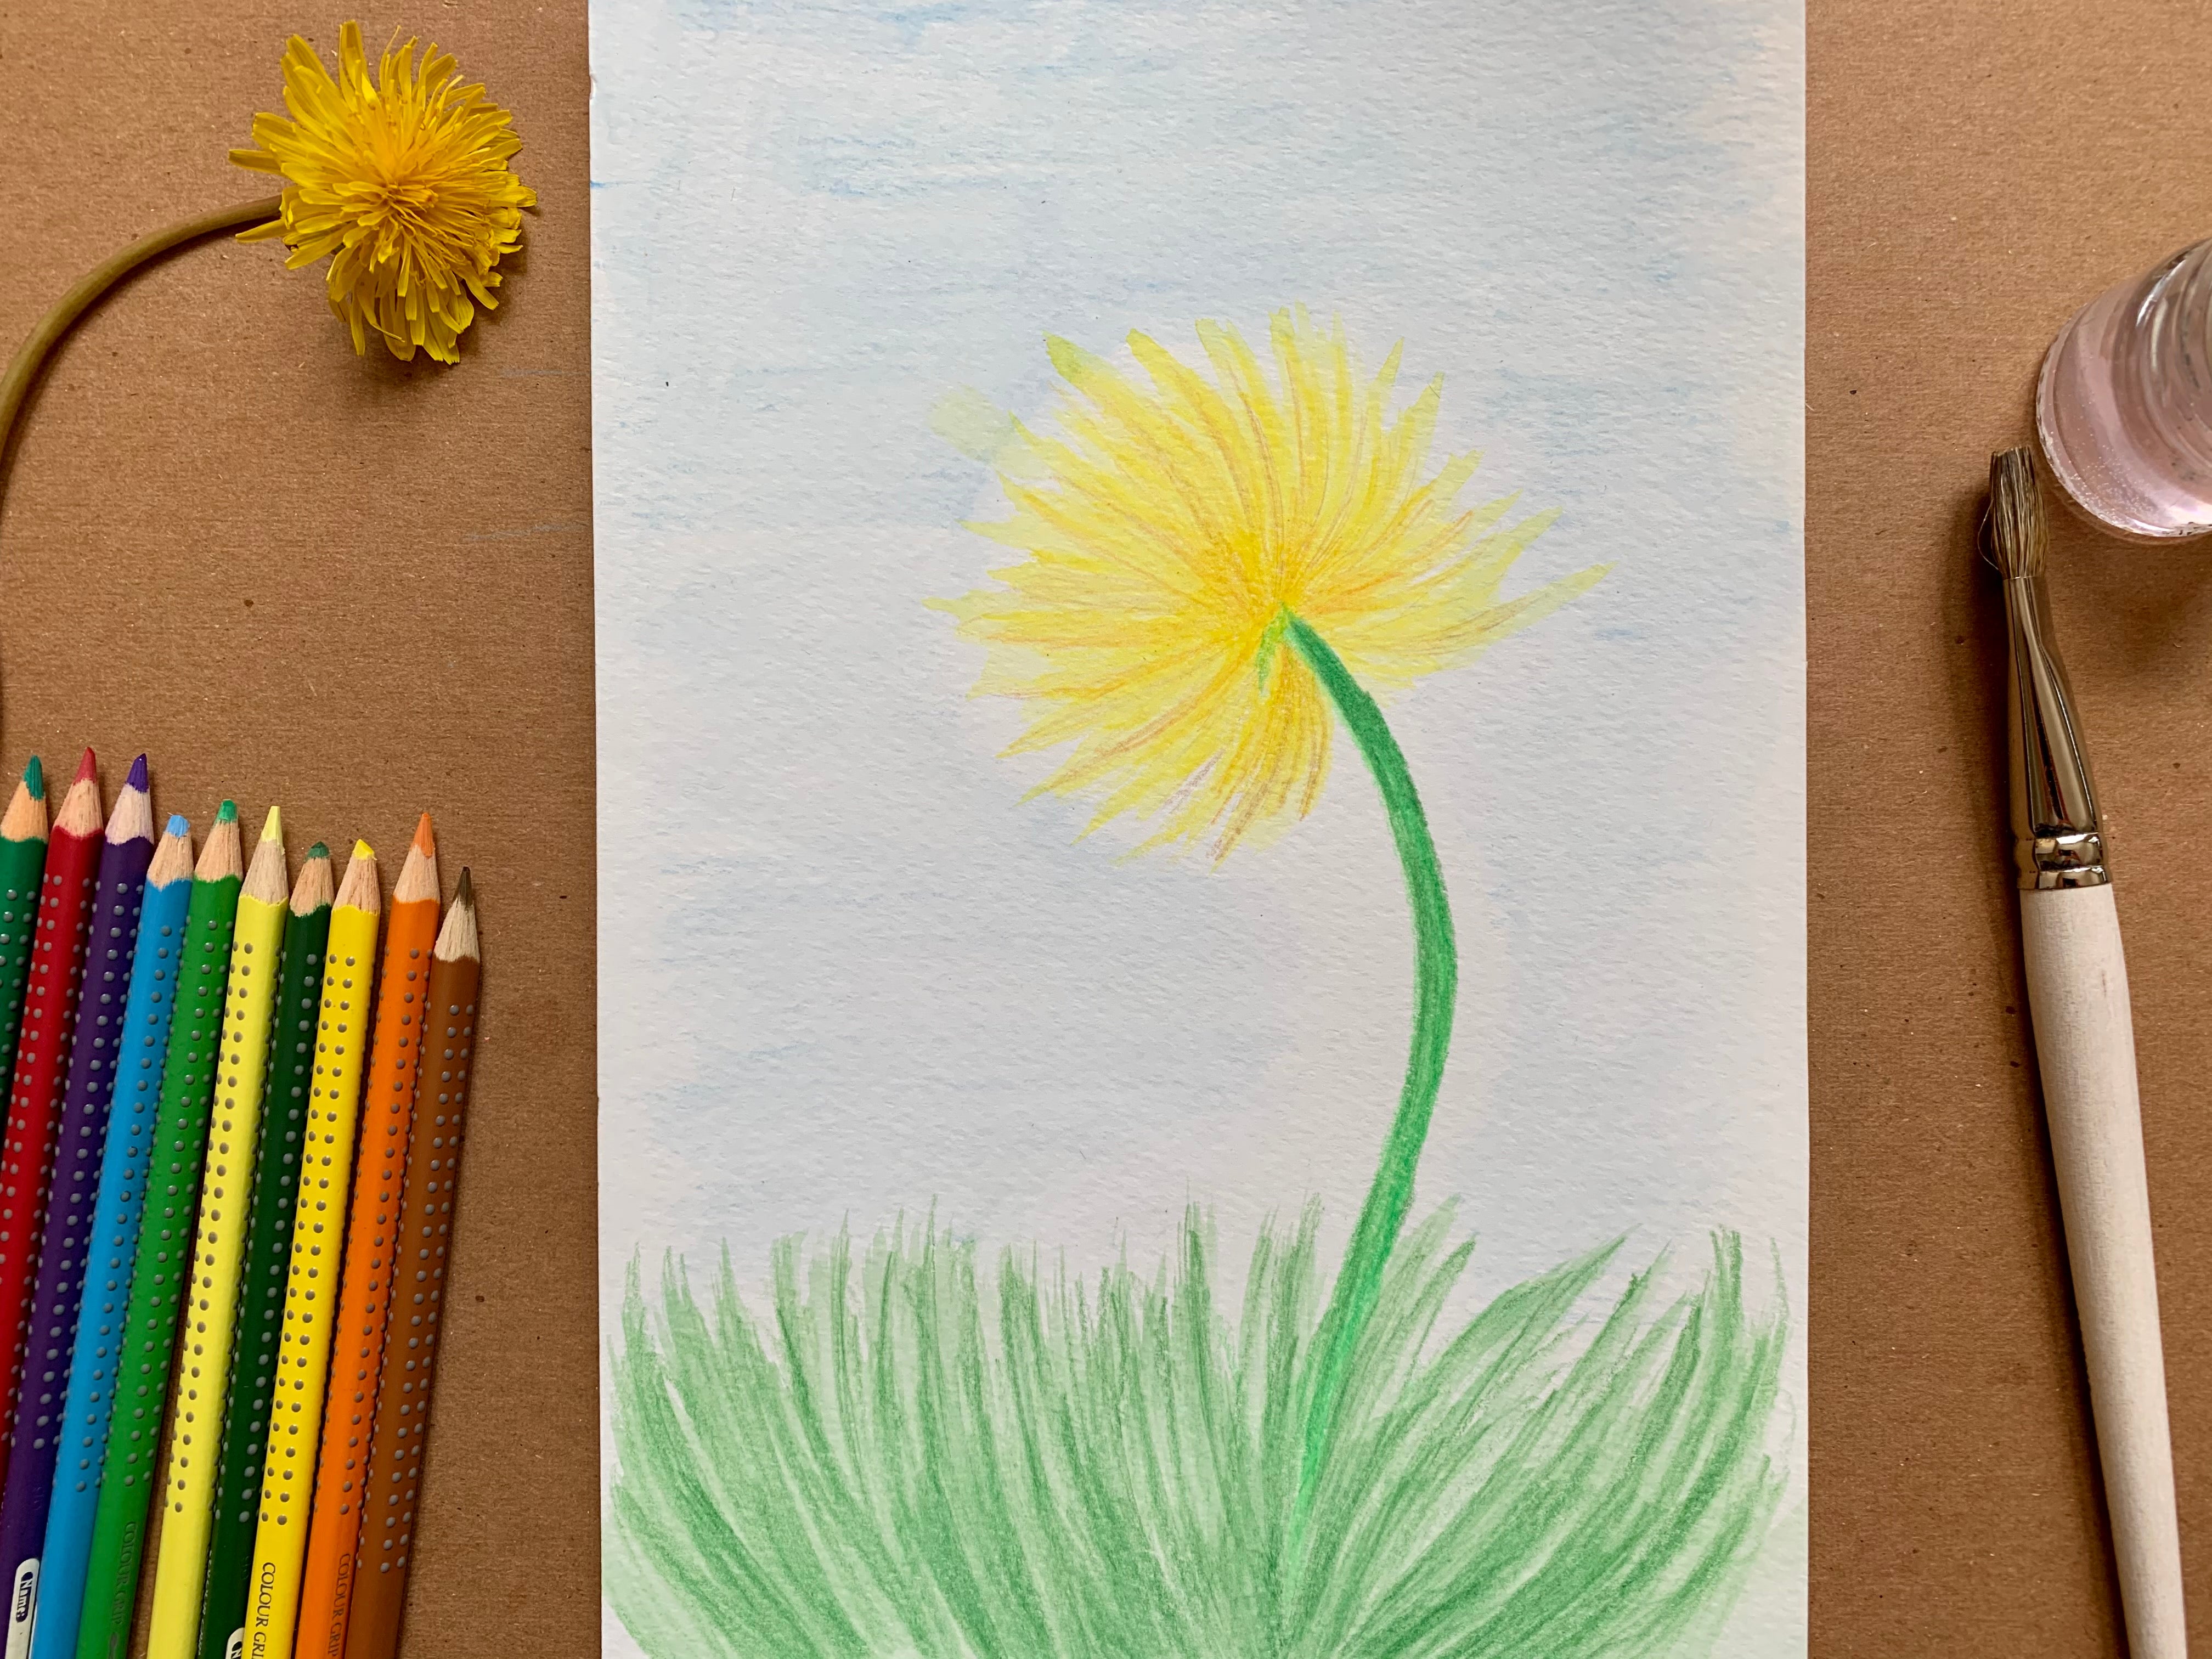 How To Use Watercolor Pencils for Beginners 